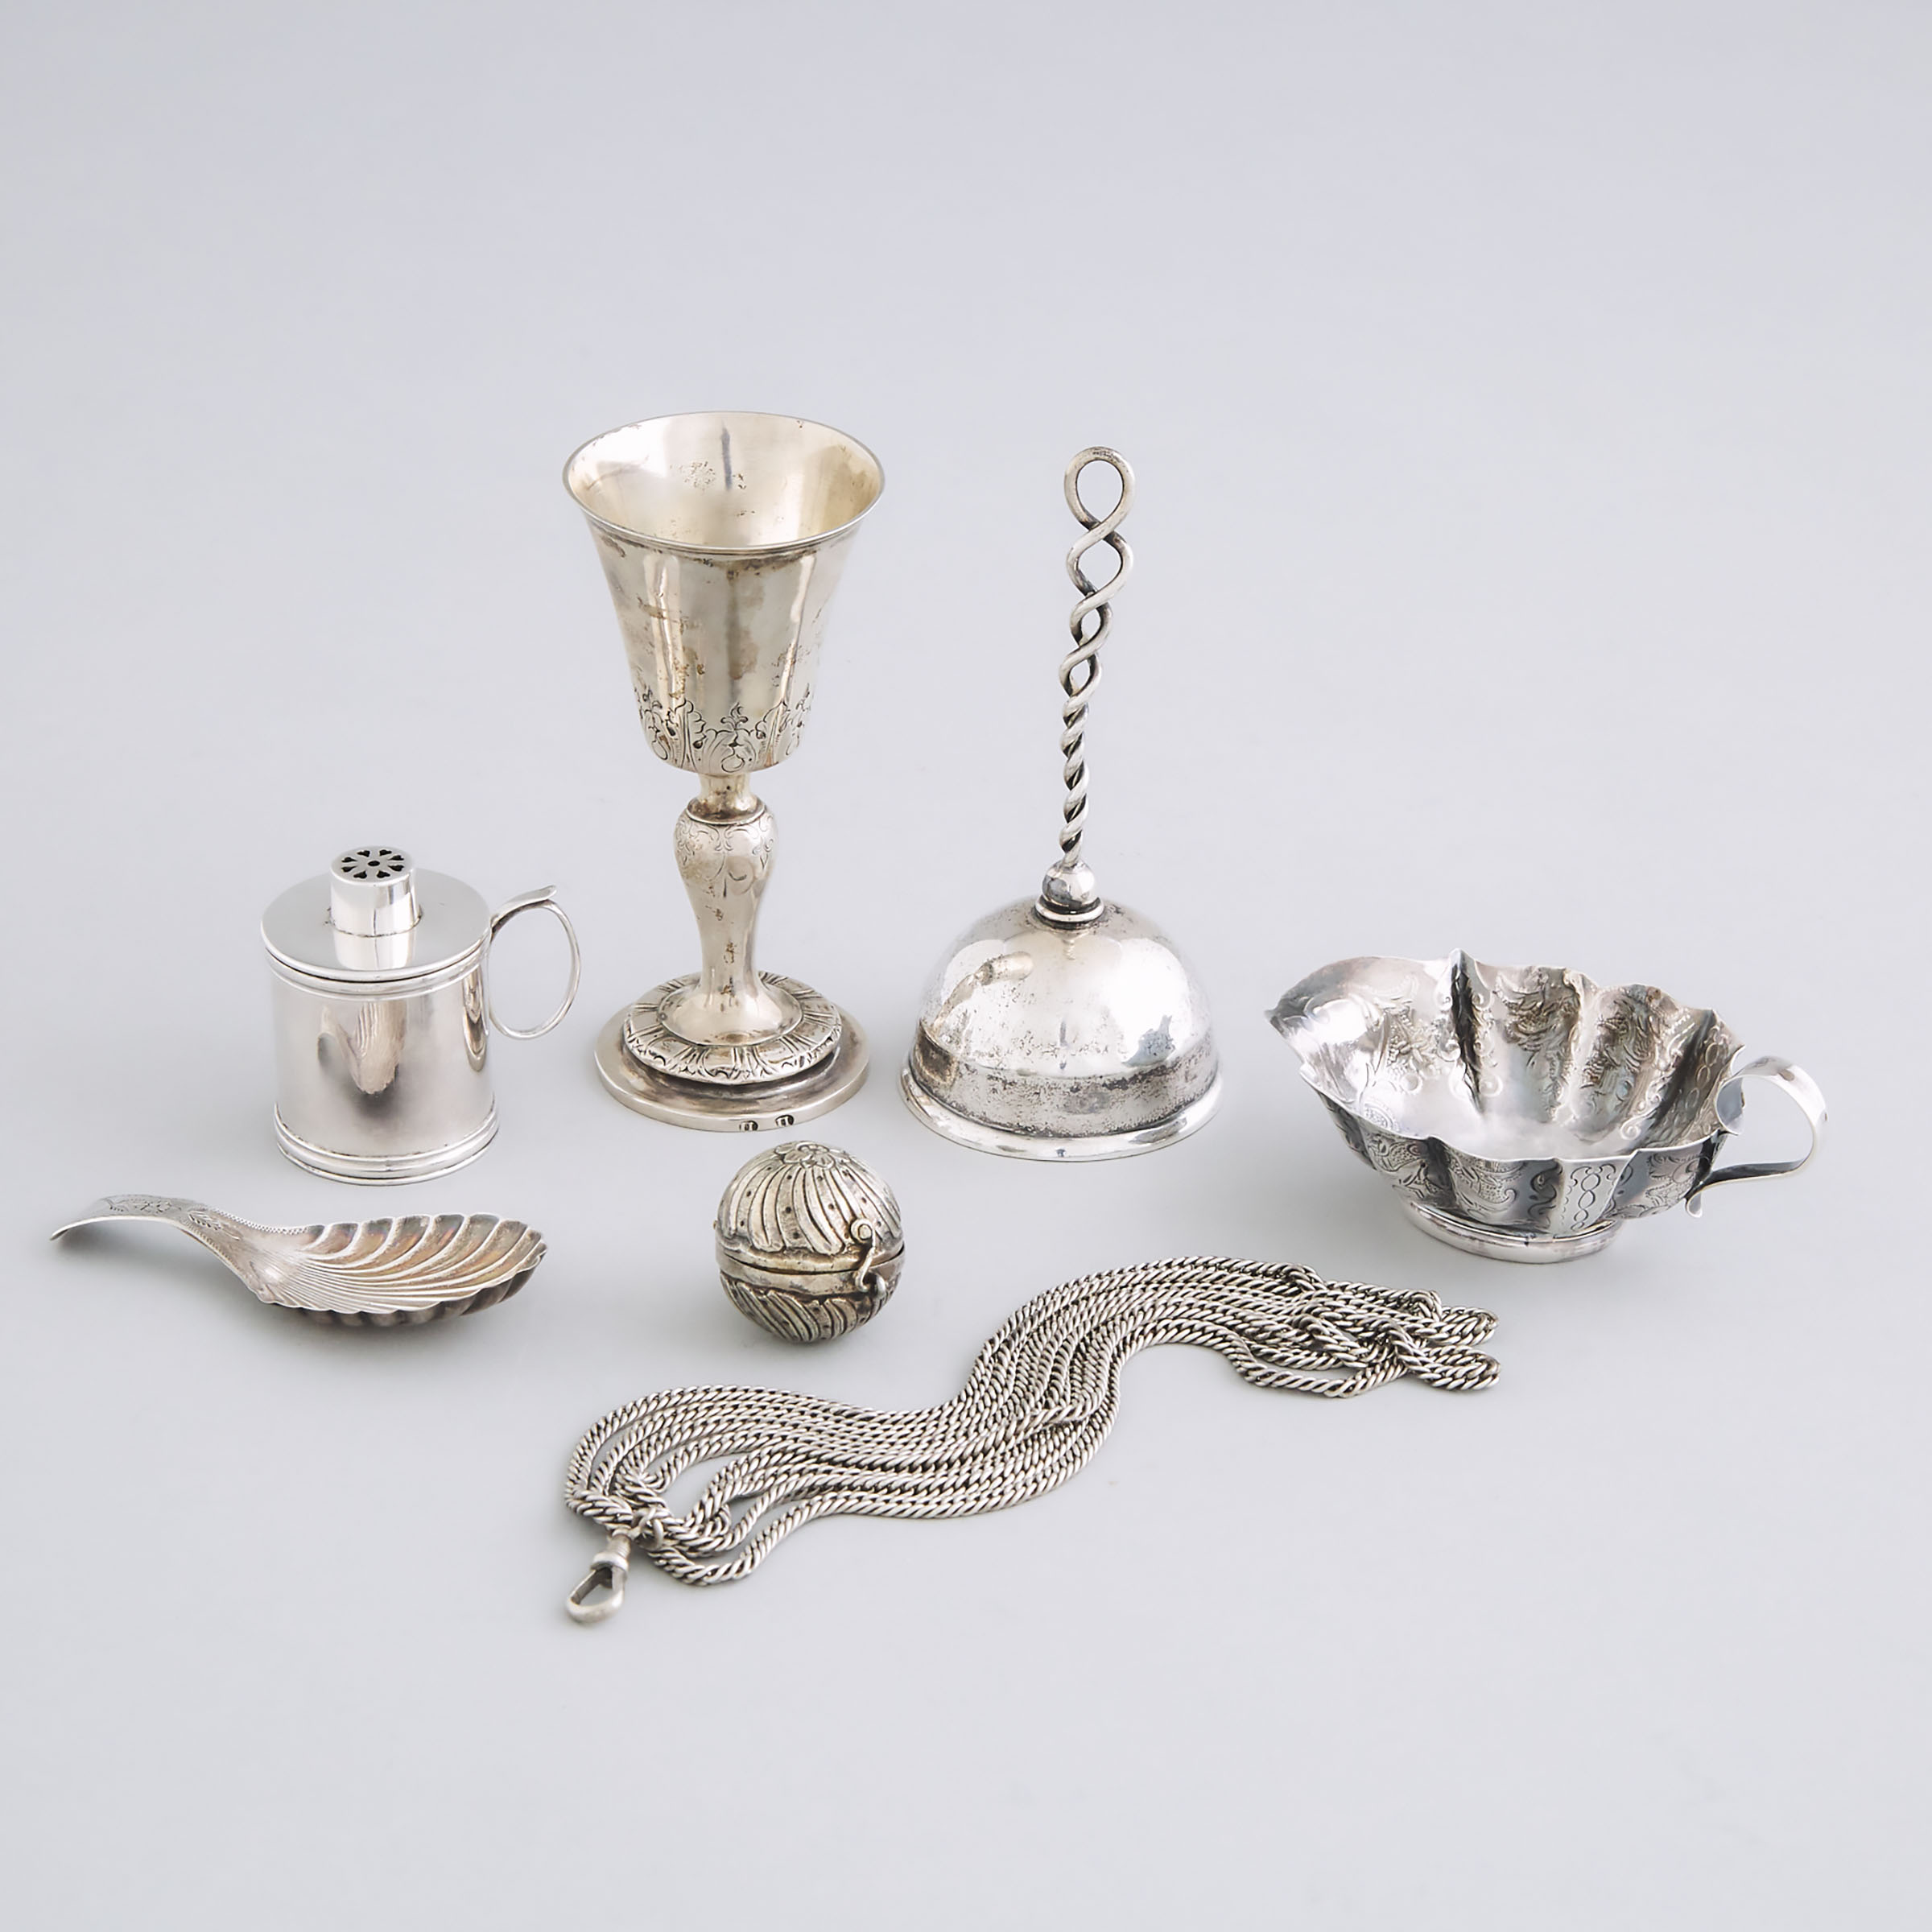 Group of English, Continental and Canadian Silver, 19th century